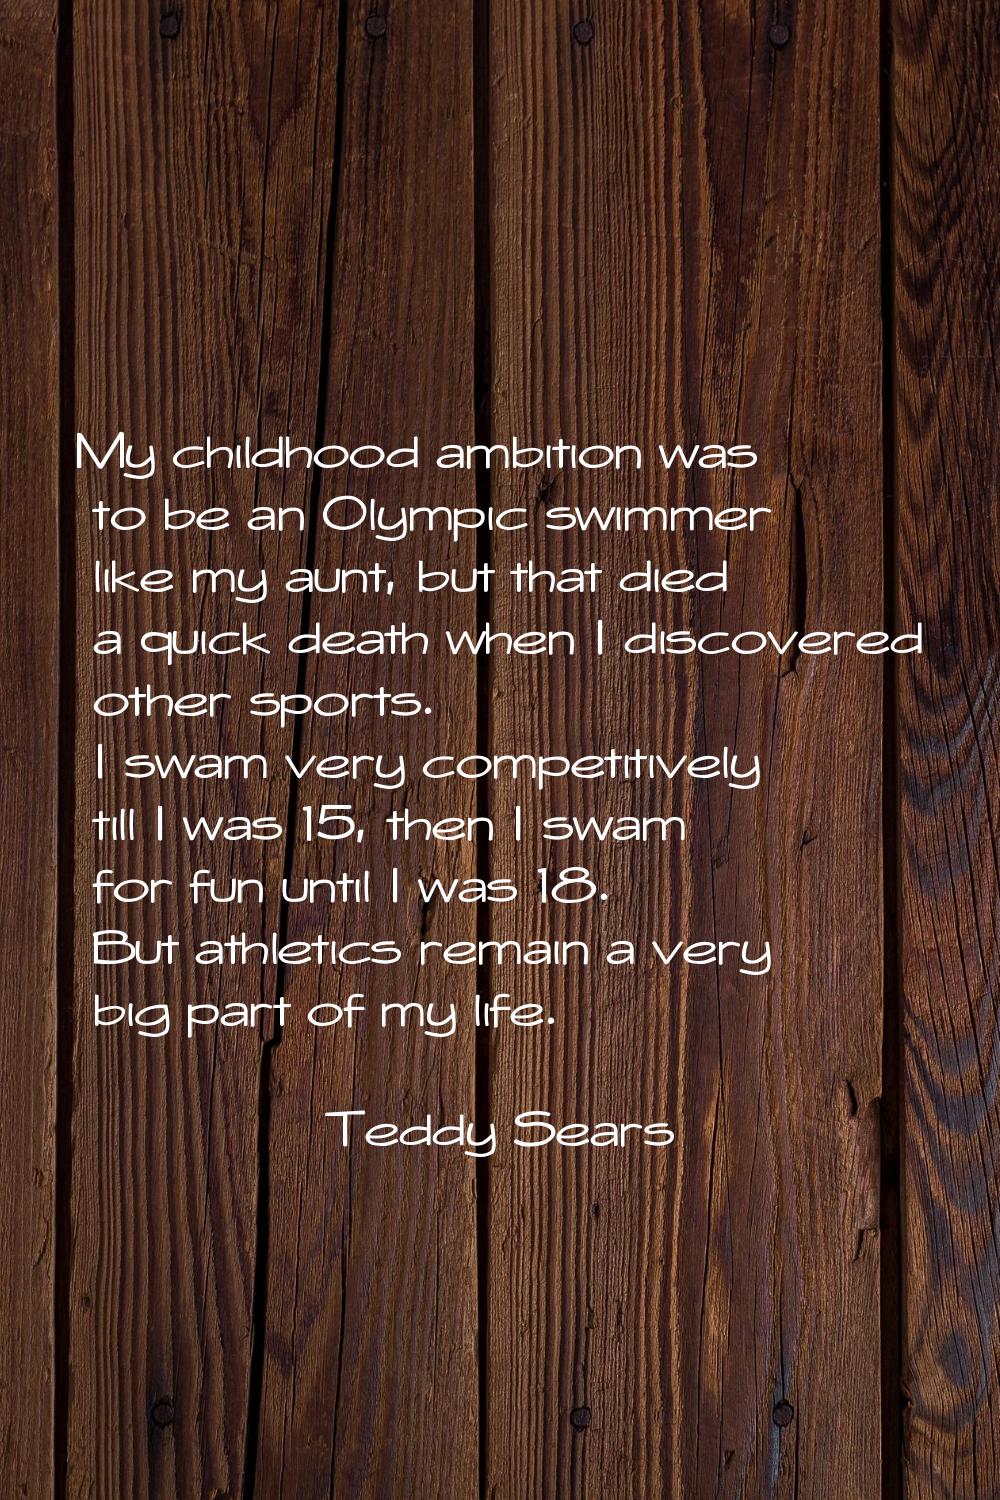 My childhood ambition was to be an Olympic swimmer like my aunt, but that died a quick death when I